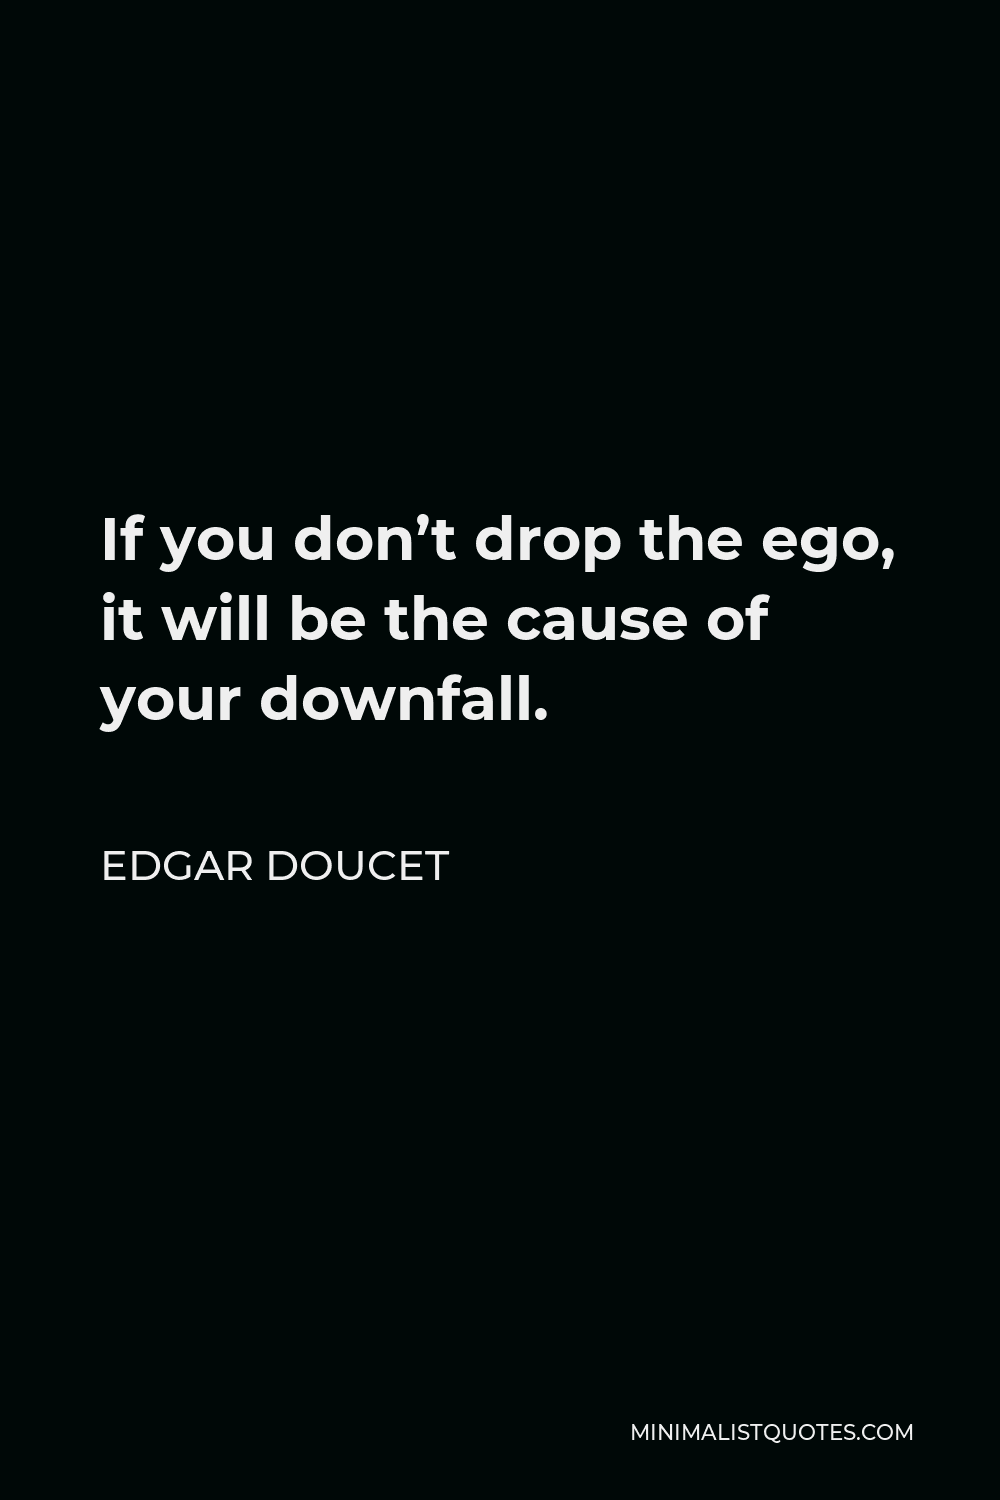 Edgar Doucet Quote - If you don’t drop the ego, it will be the cause of your downfall.